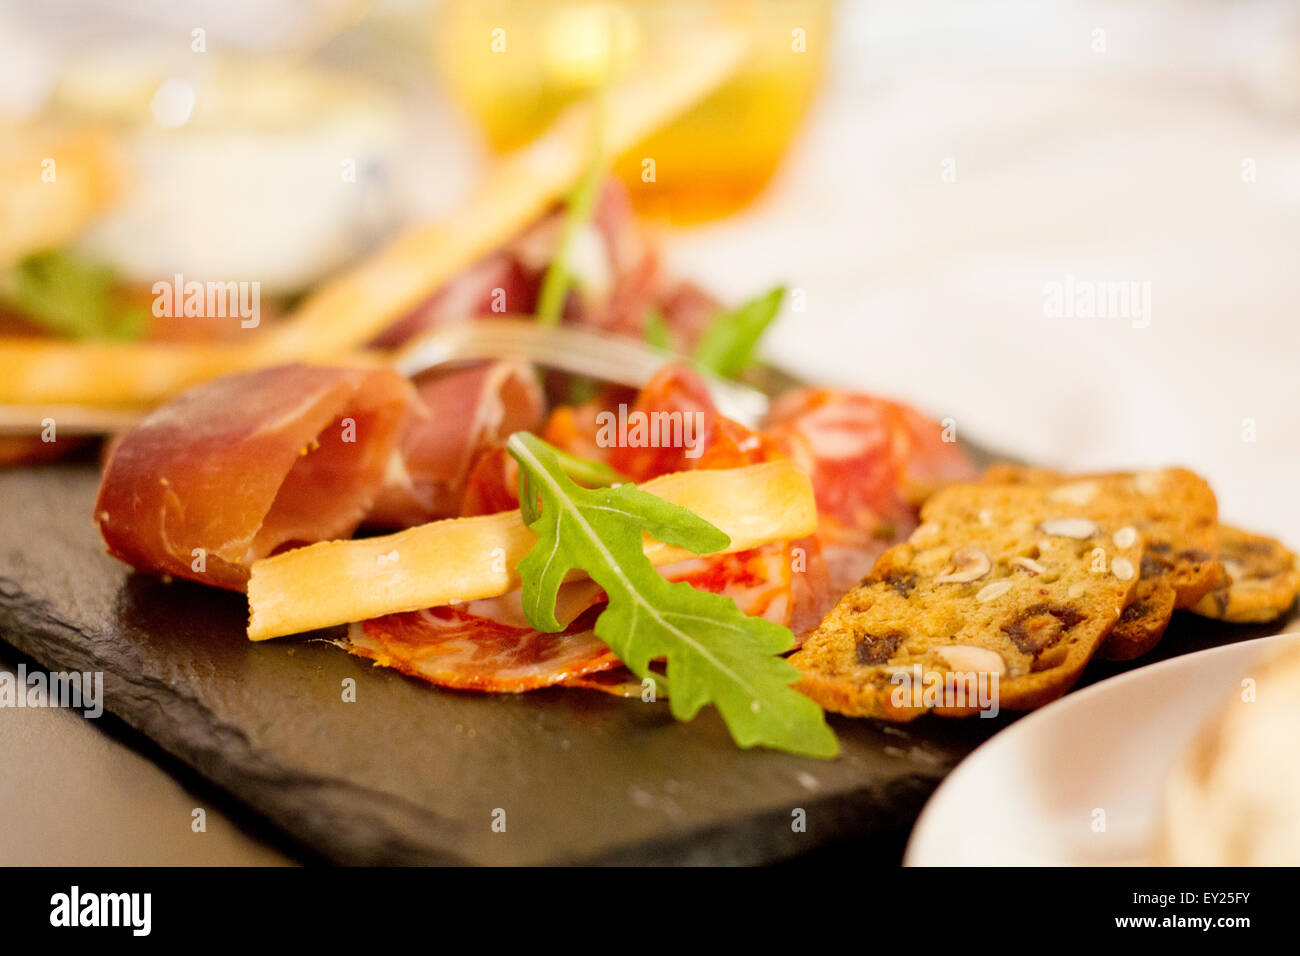 Cold meat plate Stock Photo